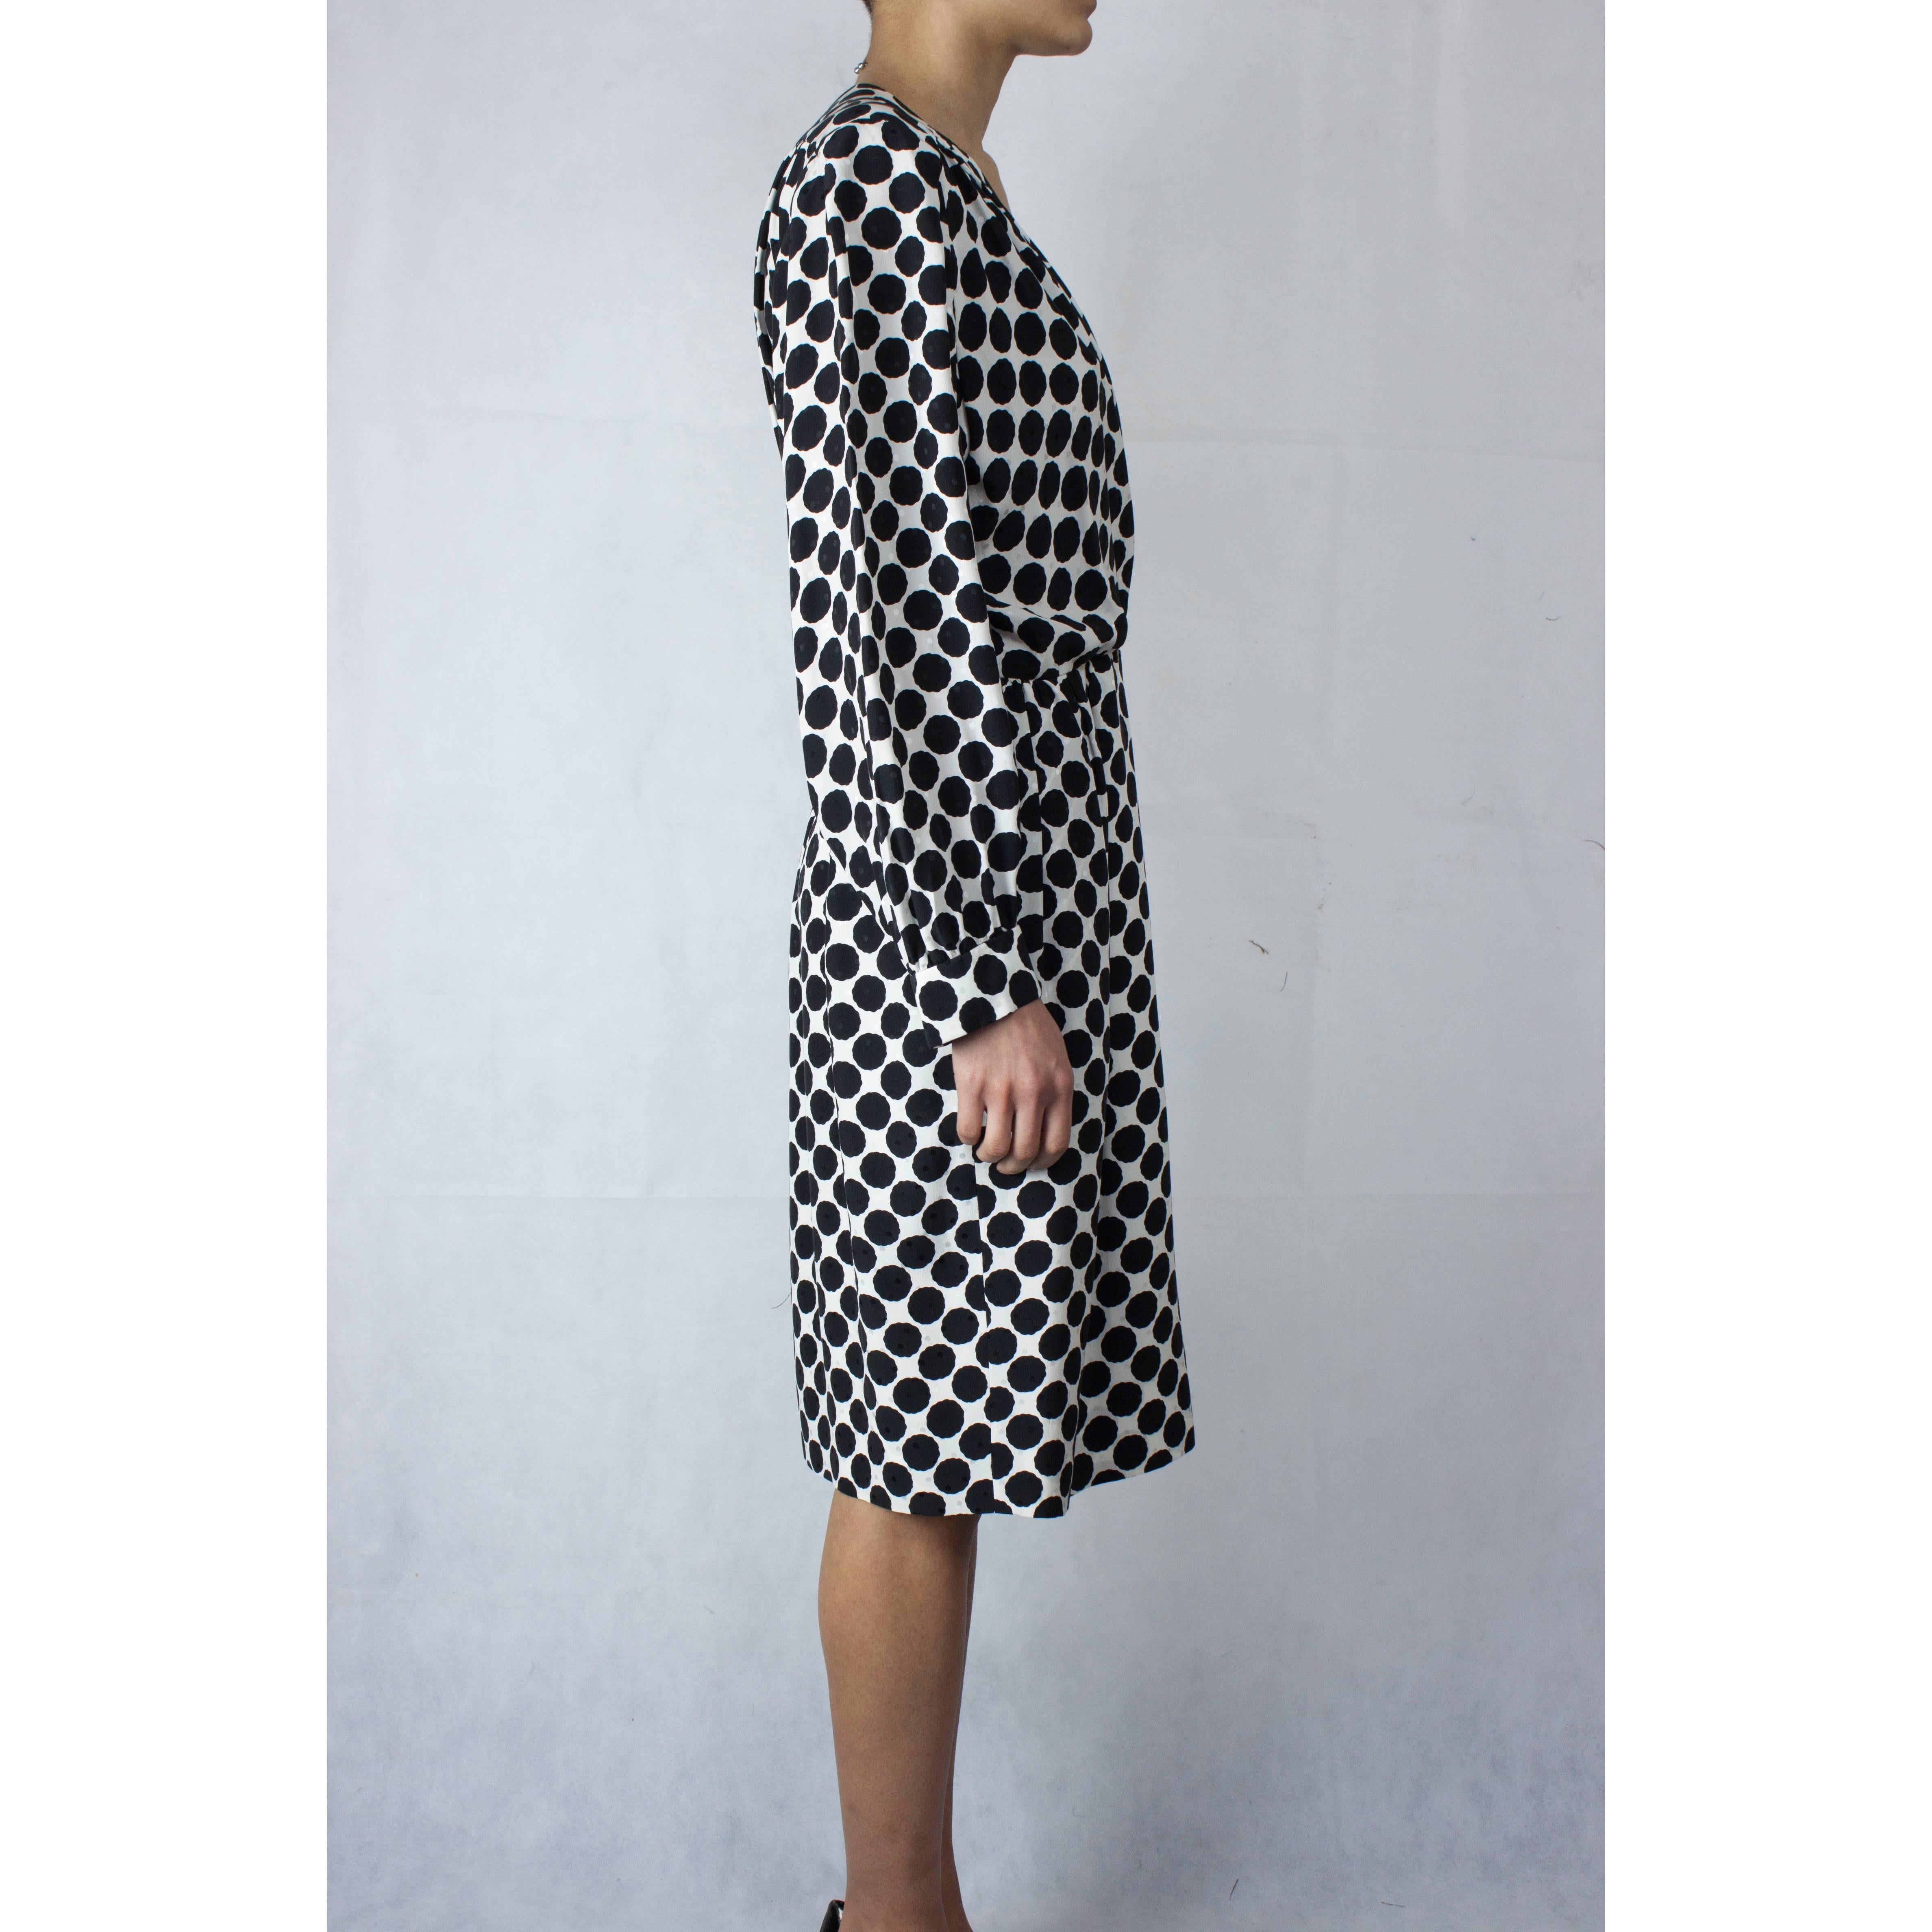 Saint Laurent opt art wraparound embossed silk dress with black dots, circa 1980 In Excellent Condition For Sale In London, GB